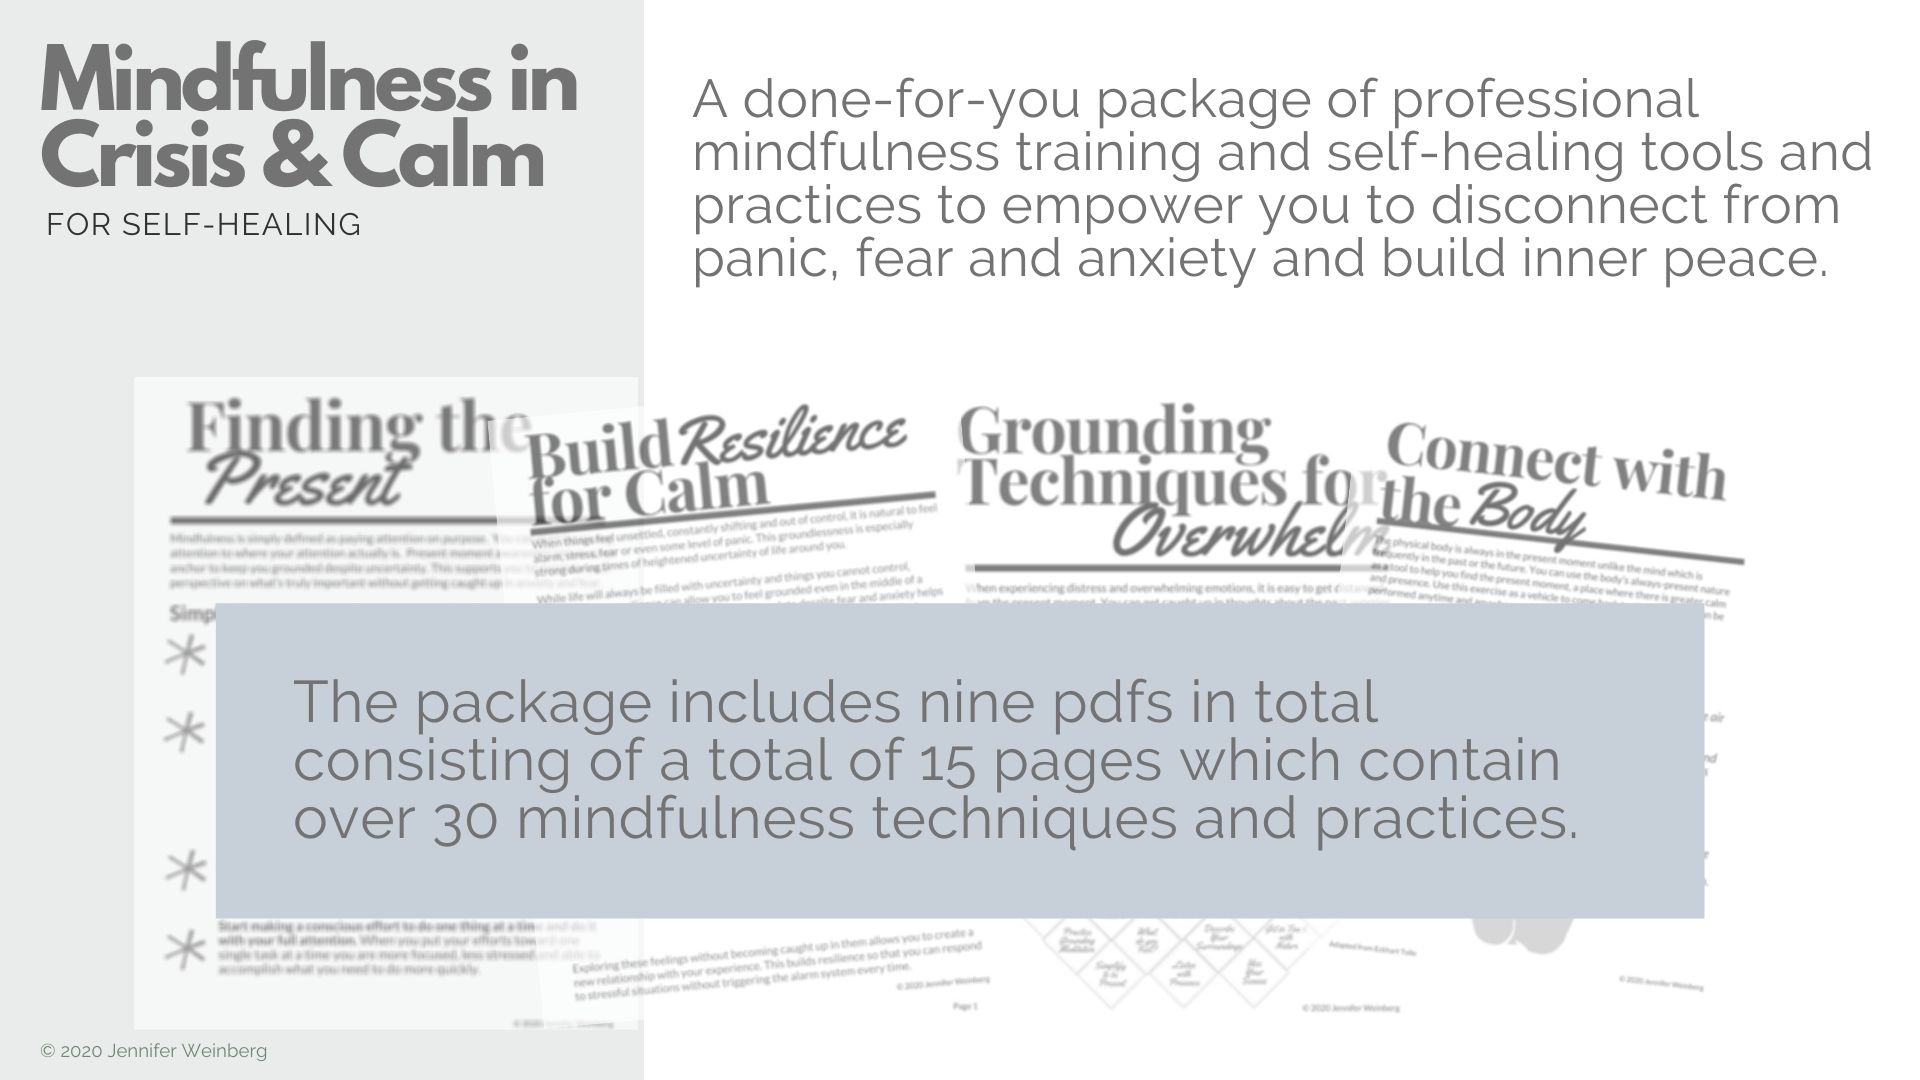 Mindfulness Resources in Crisis & Calm {Self-Healing Package} A package of professional mindfulness resources for self-healing tools and practices to empower you to disconnect from panic, fear and anxiety and build inner peace.